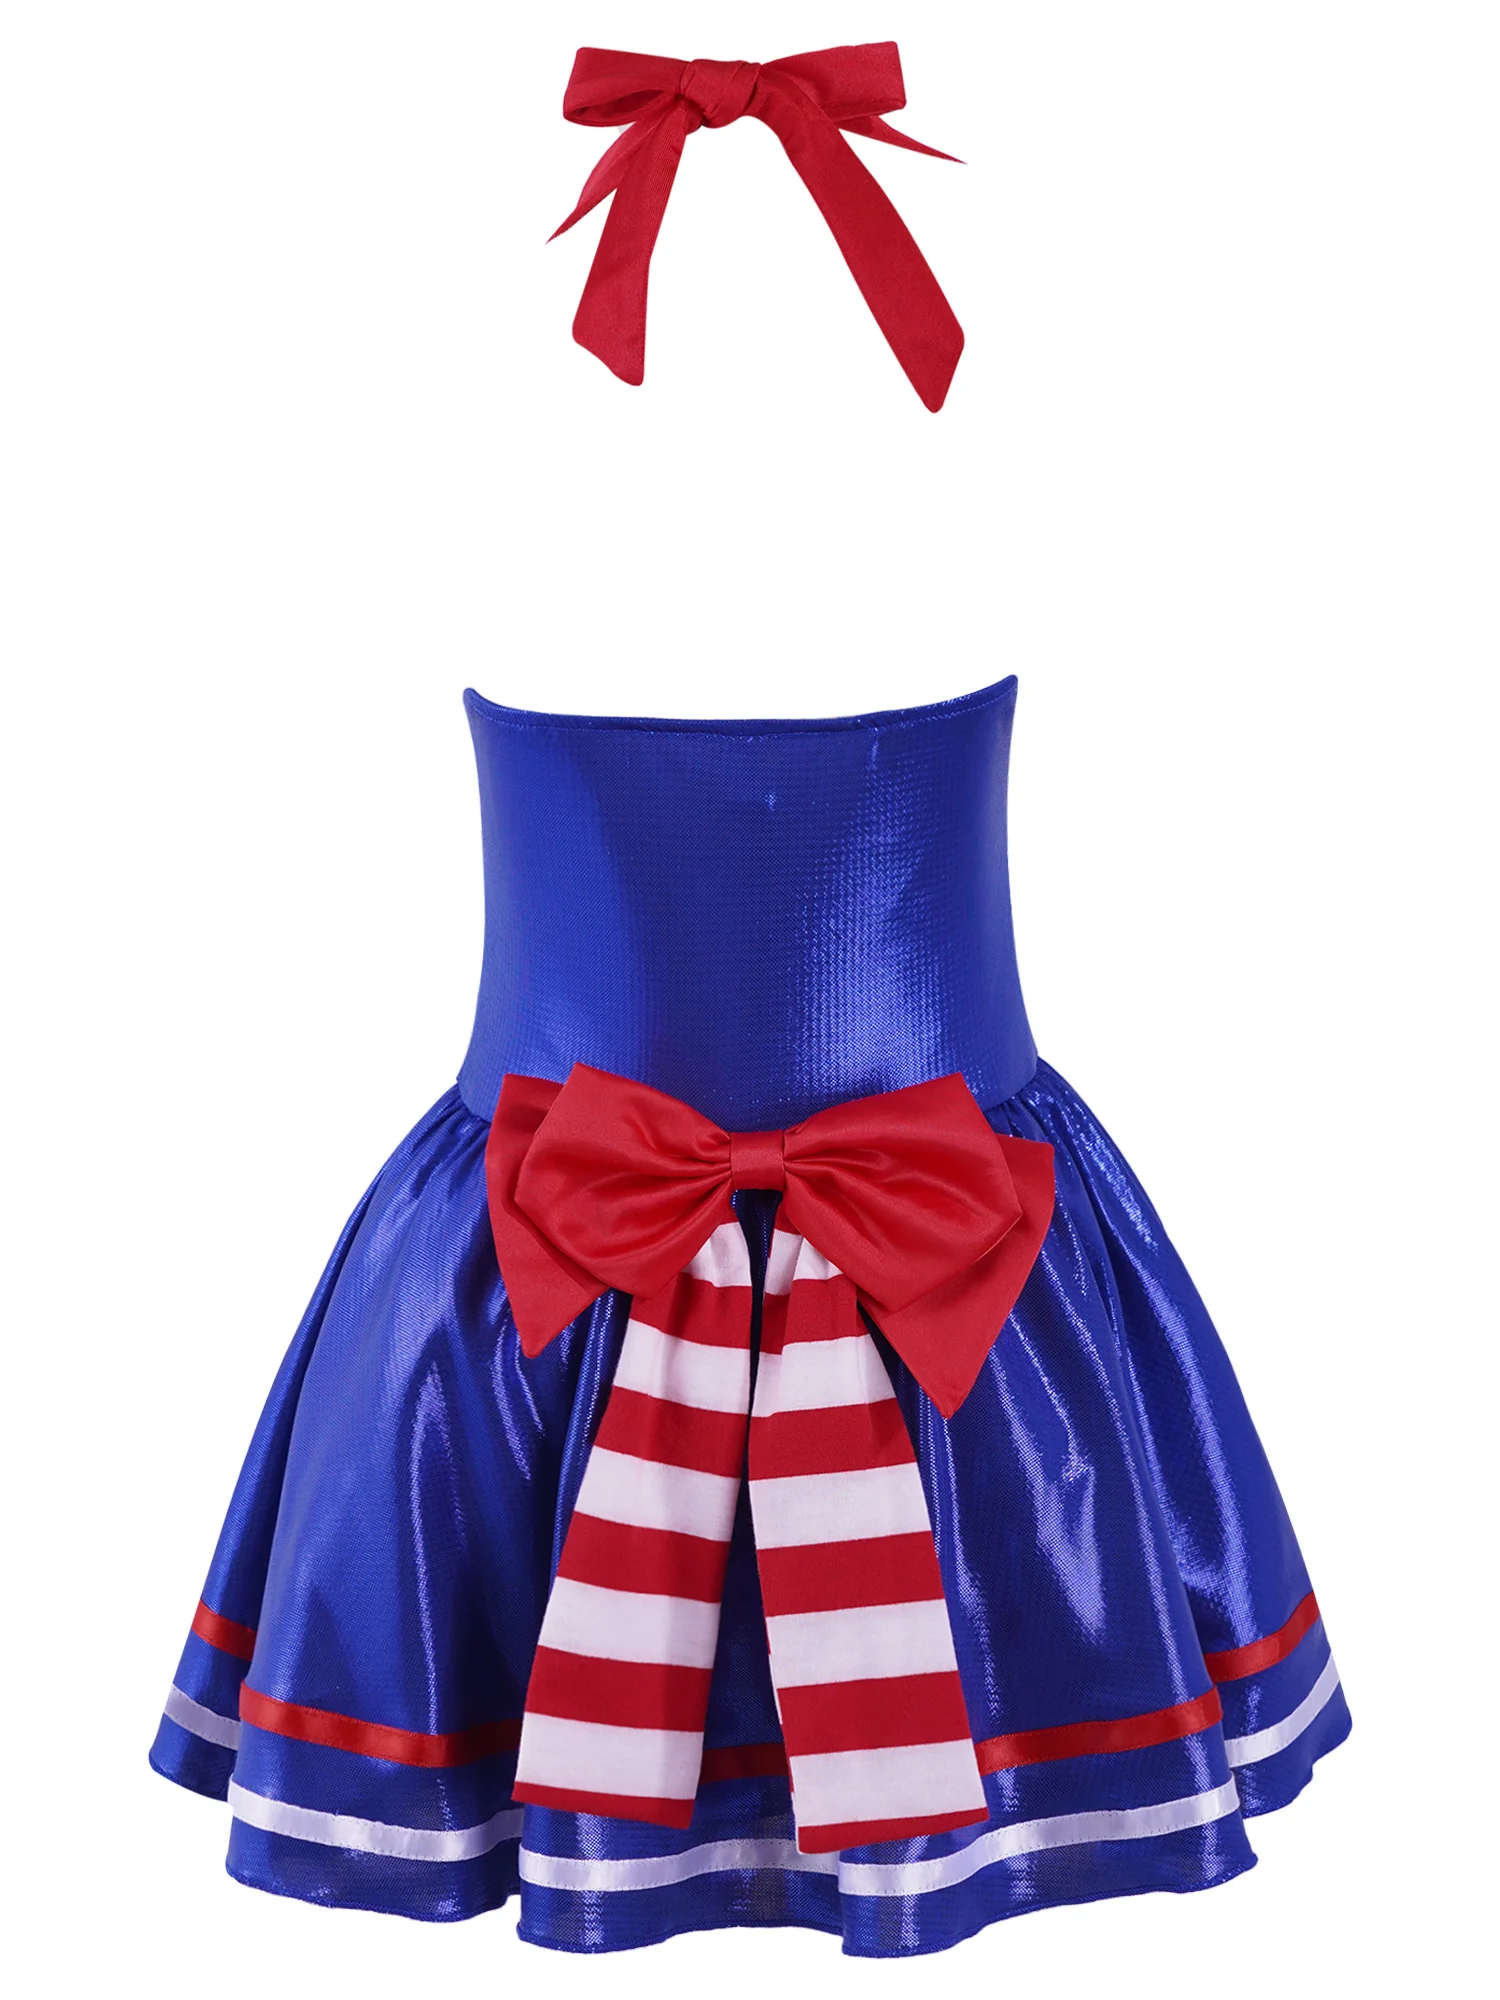 Kids Girls Patriotic Soldier Uniform 4th of July Military Army USO Dance Stage Performance Costume Halloween Fancy Dress Up images - 6